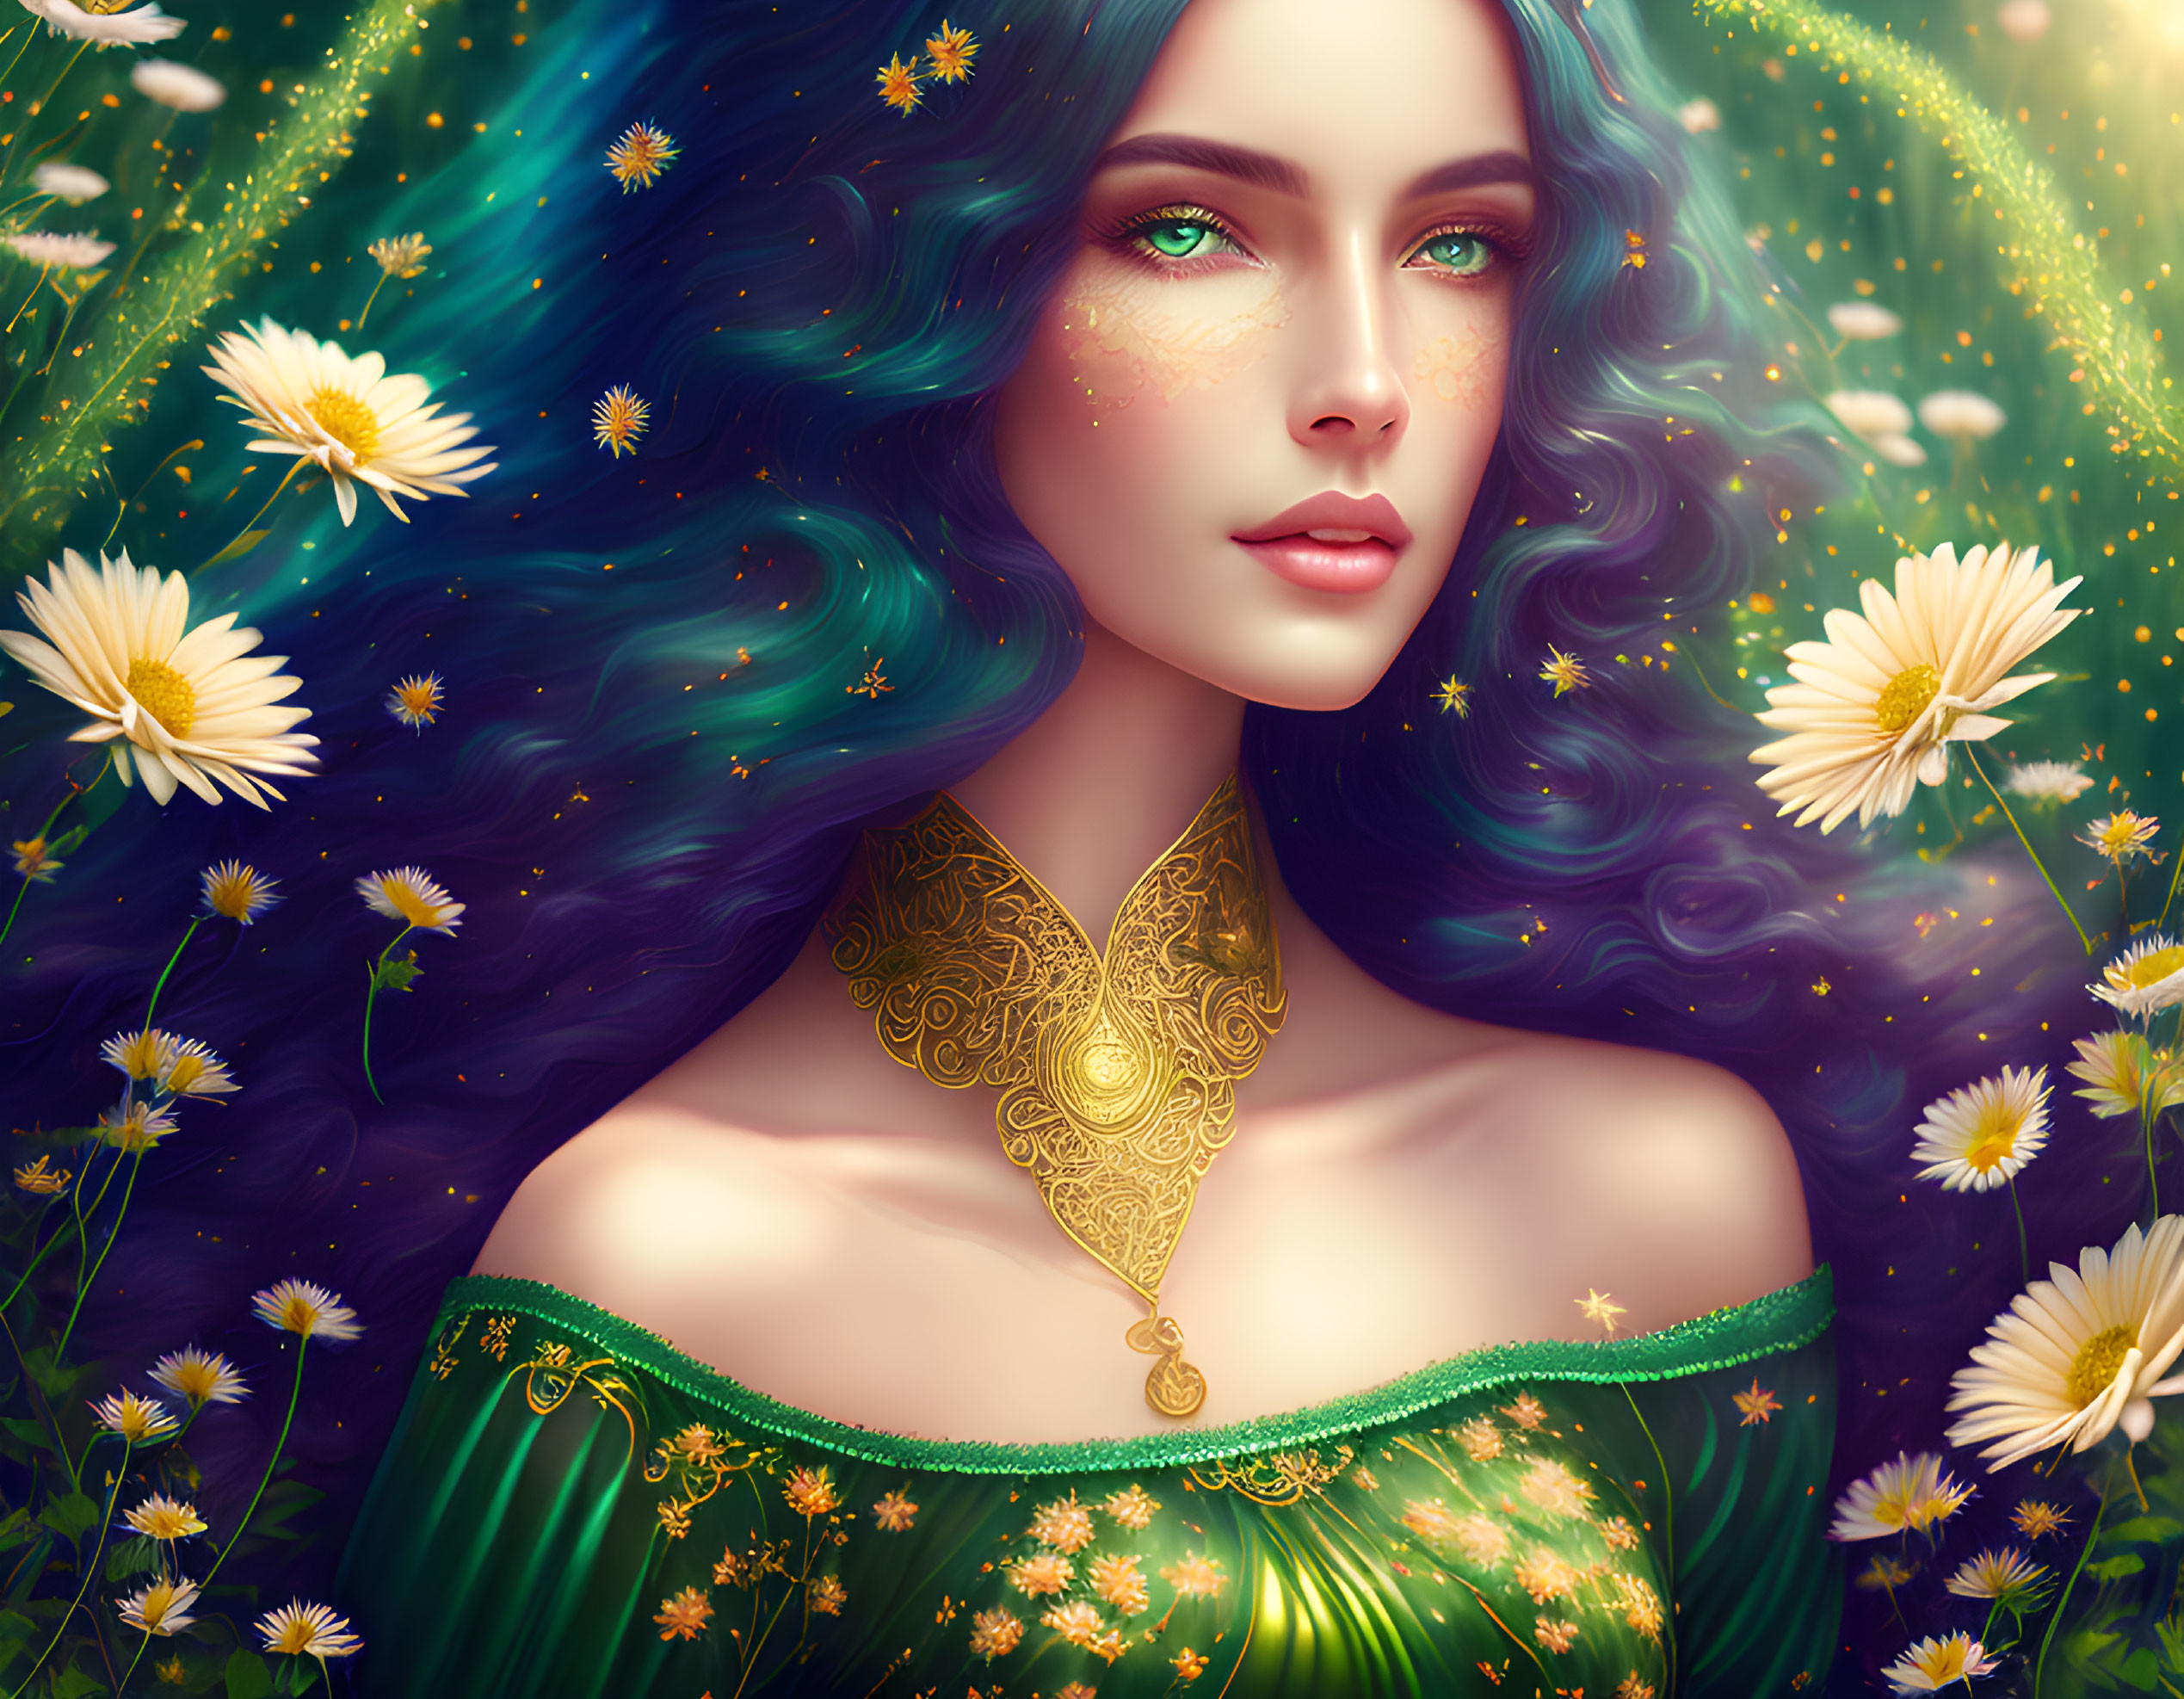 Portrait of woman with blue hair, green eyes, golden jewelry, daisies, starry backdrop